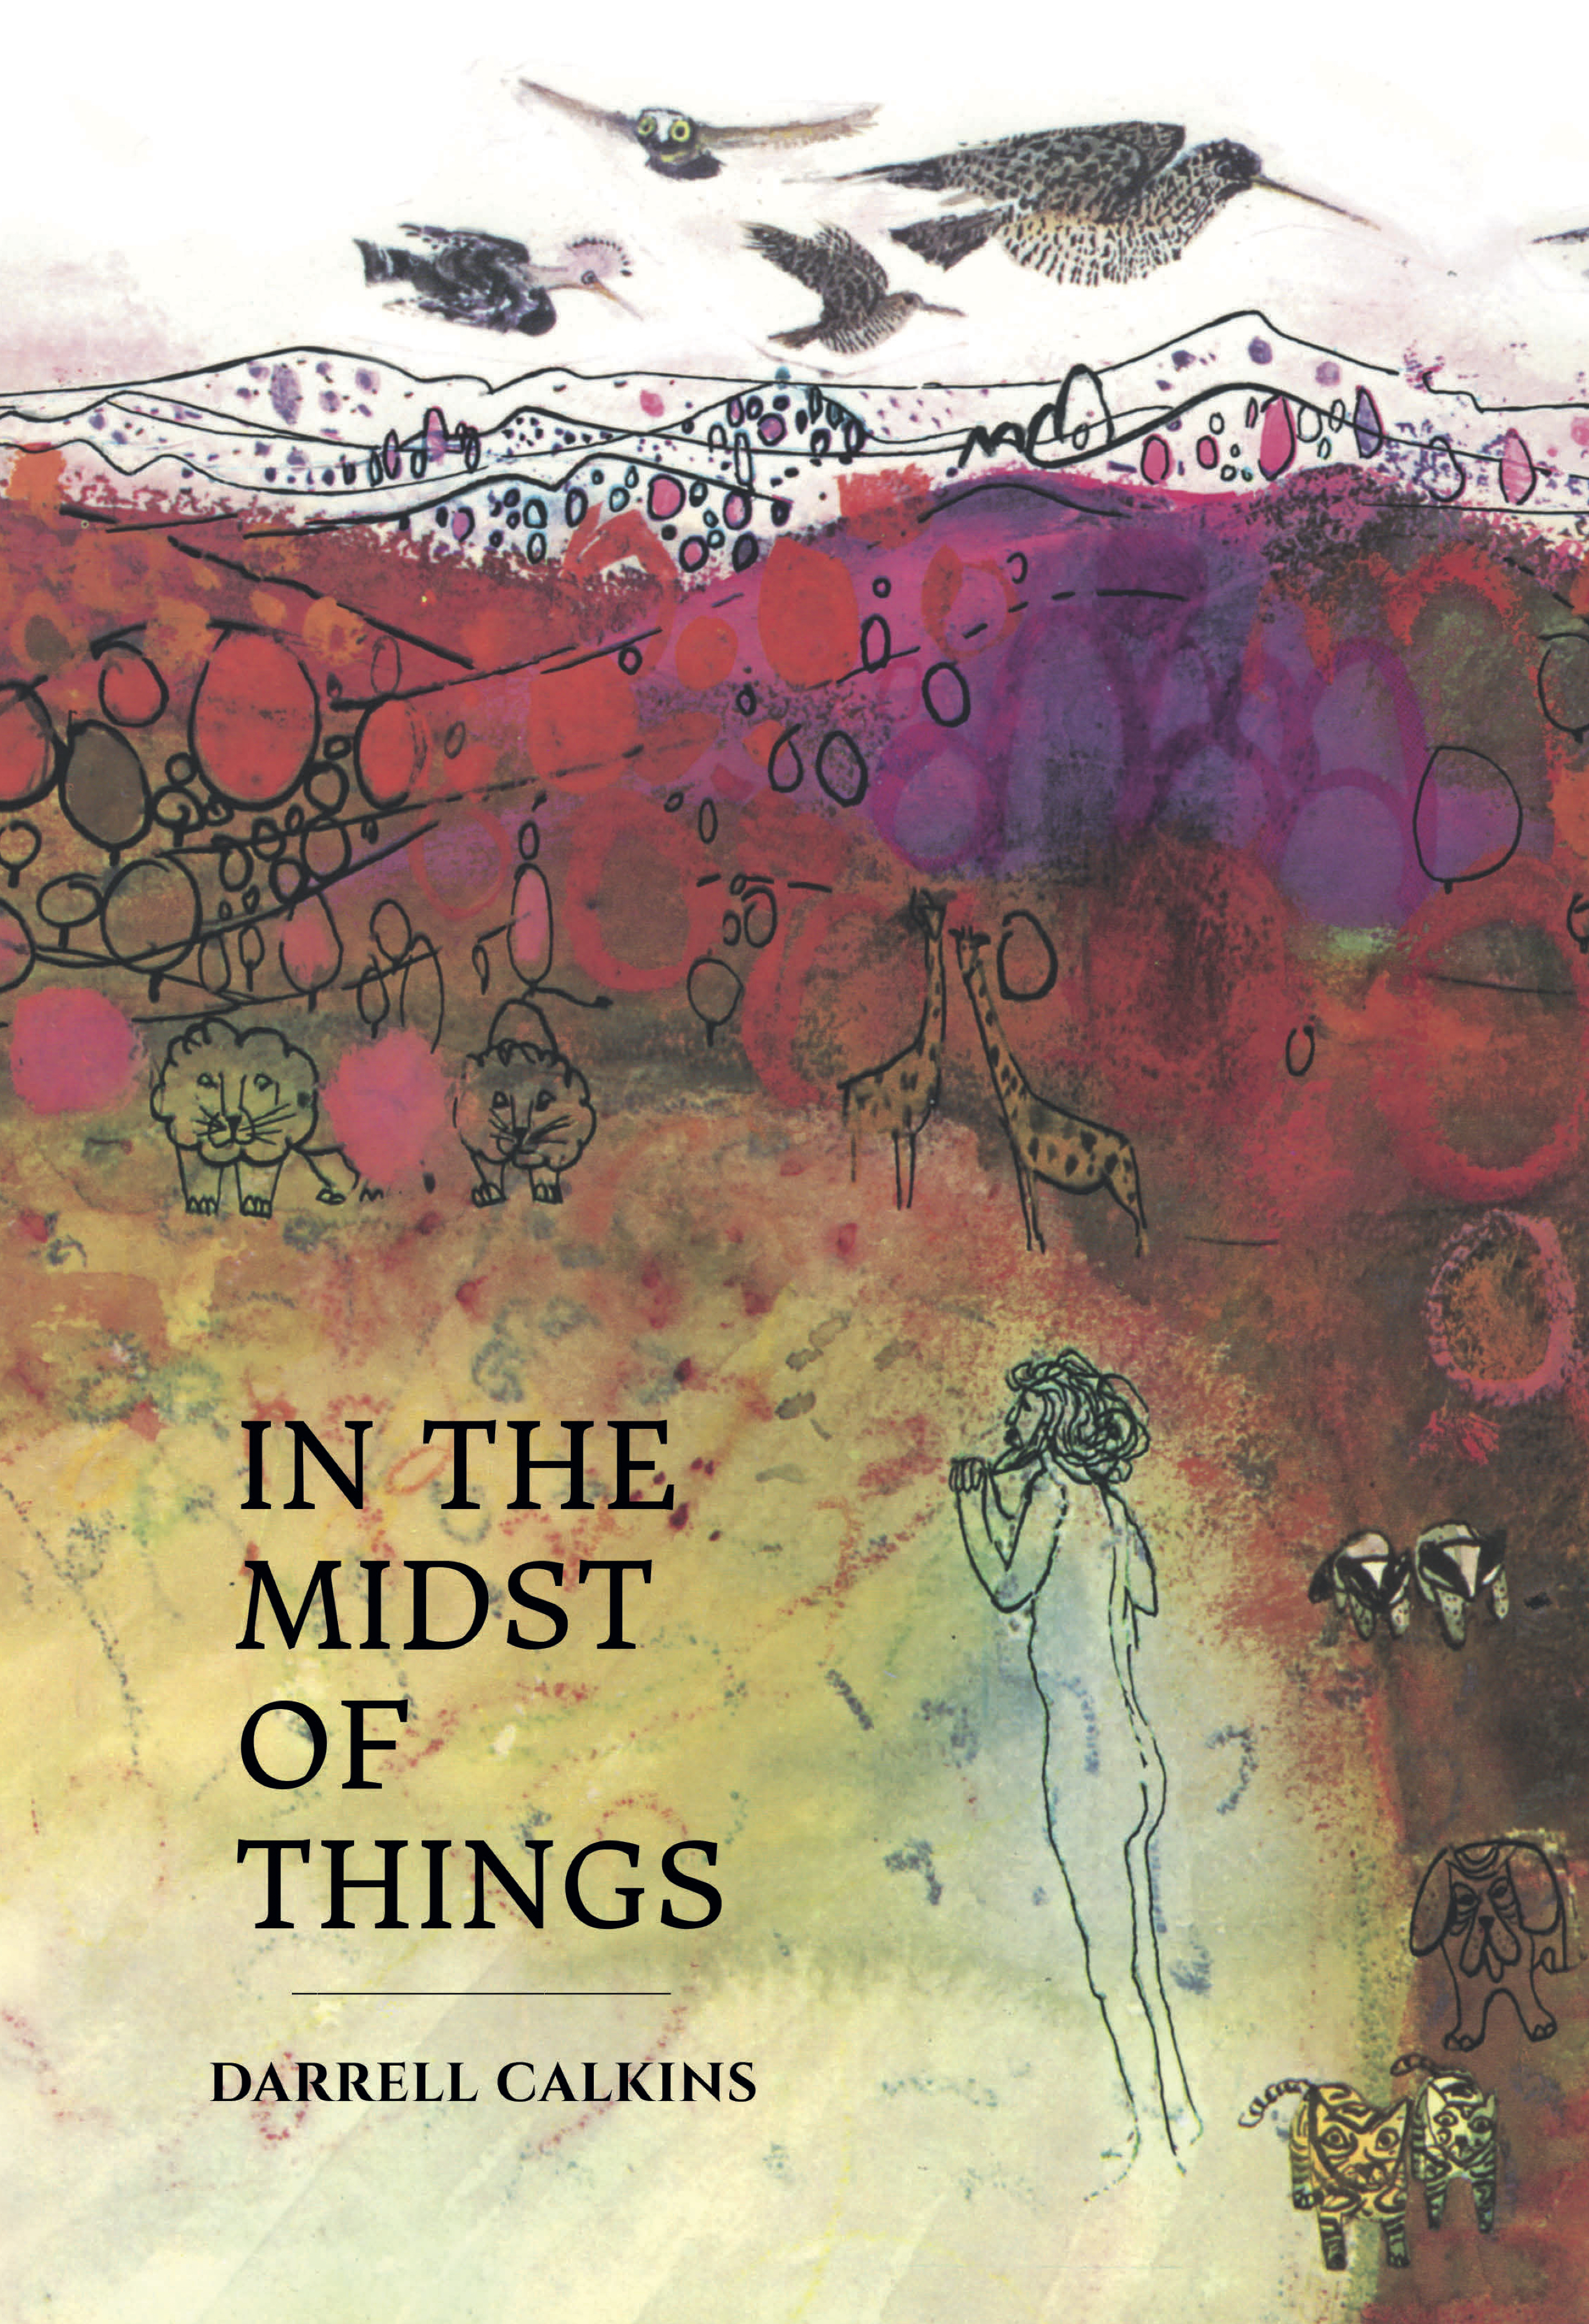 in_the_midst_of_things_darrell_calkins_front_cover